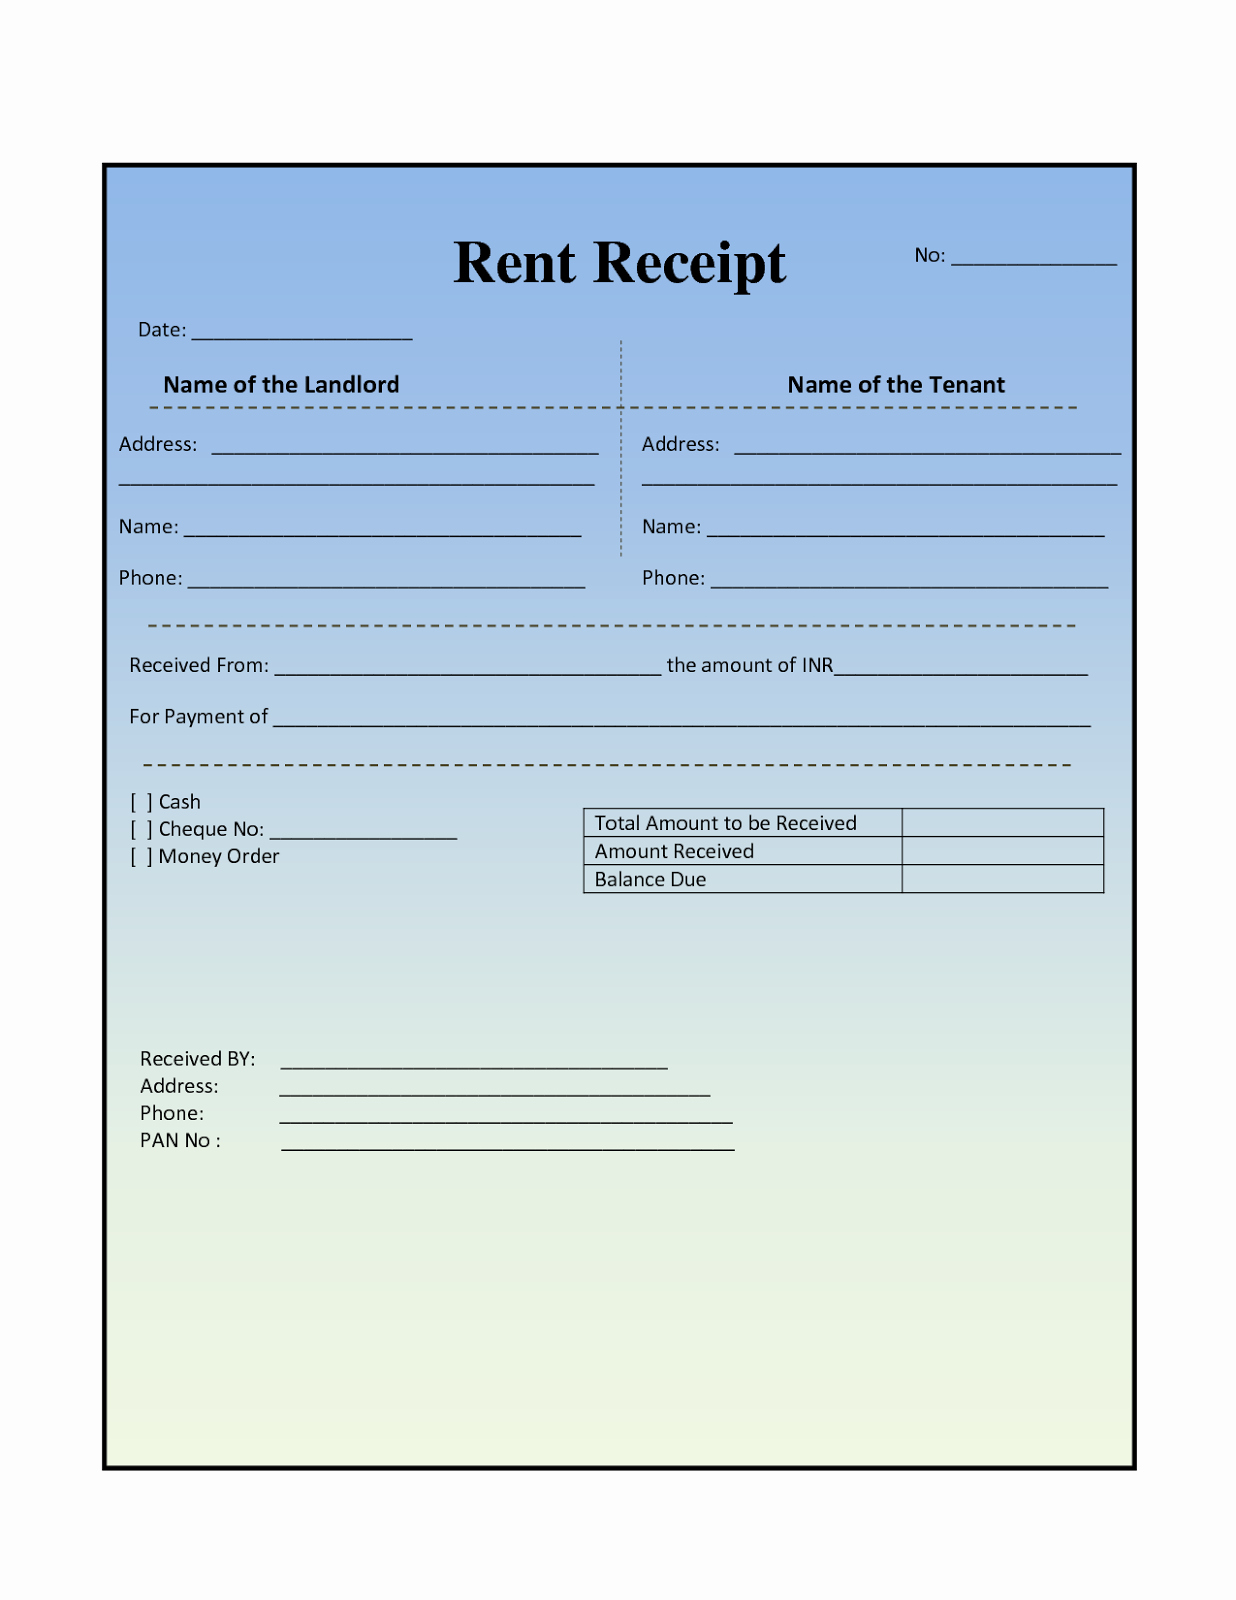 Rental Invoice Template Excel New House Rental Invoice Template In Excel format Rent